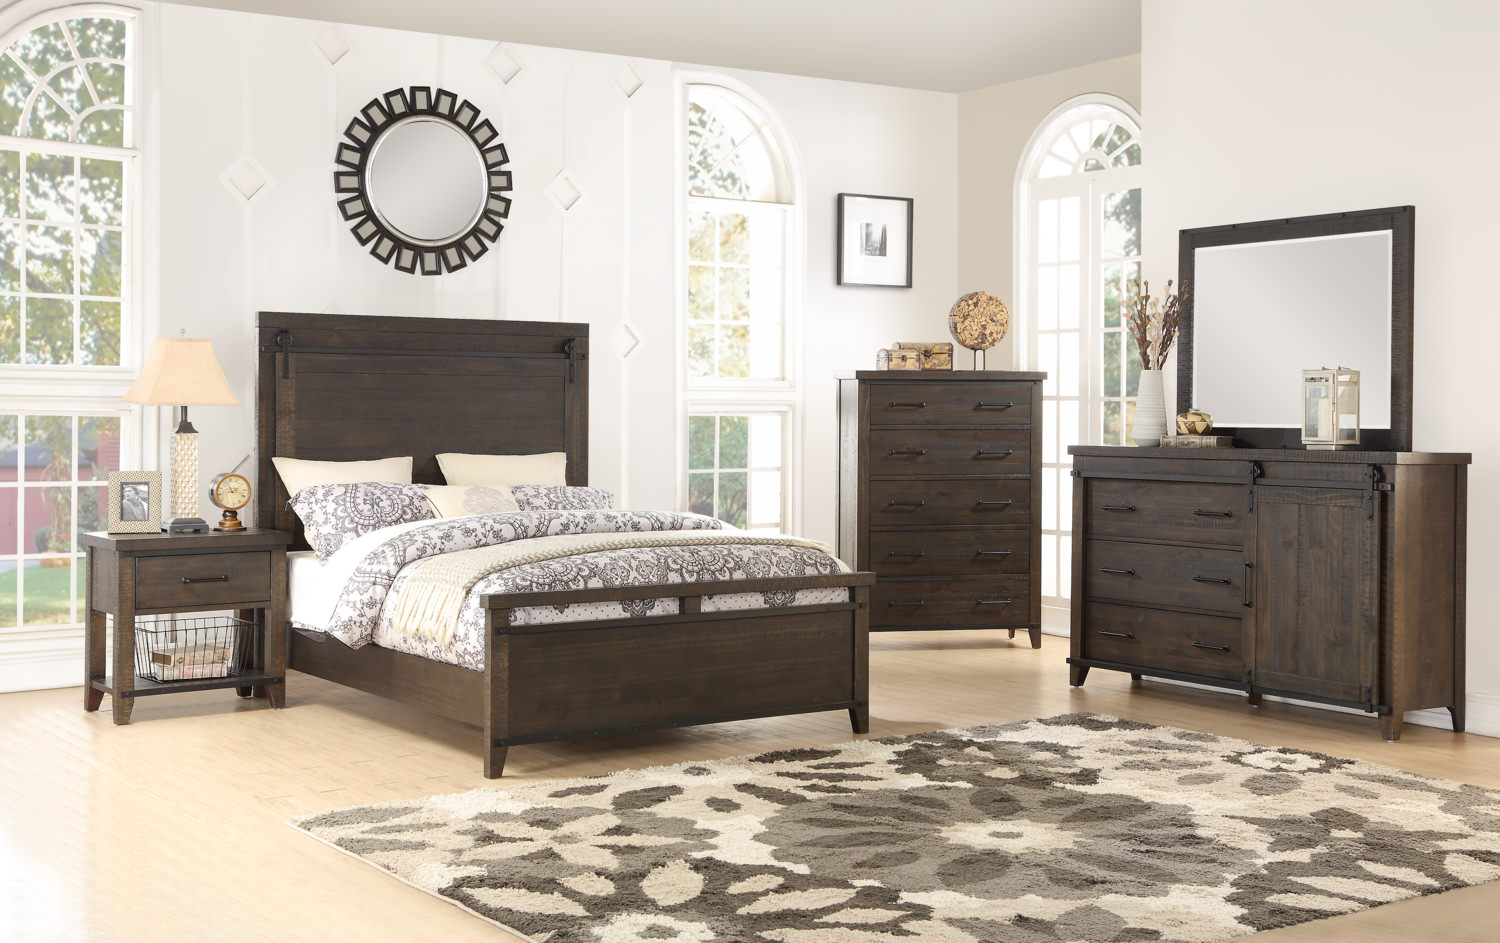 Urban Barn Bedroom Suite By Thomas Cole Hom Furniture